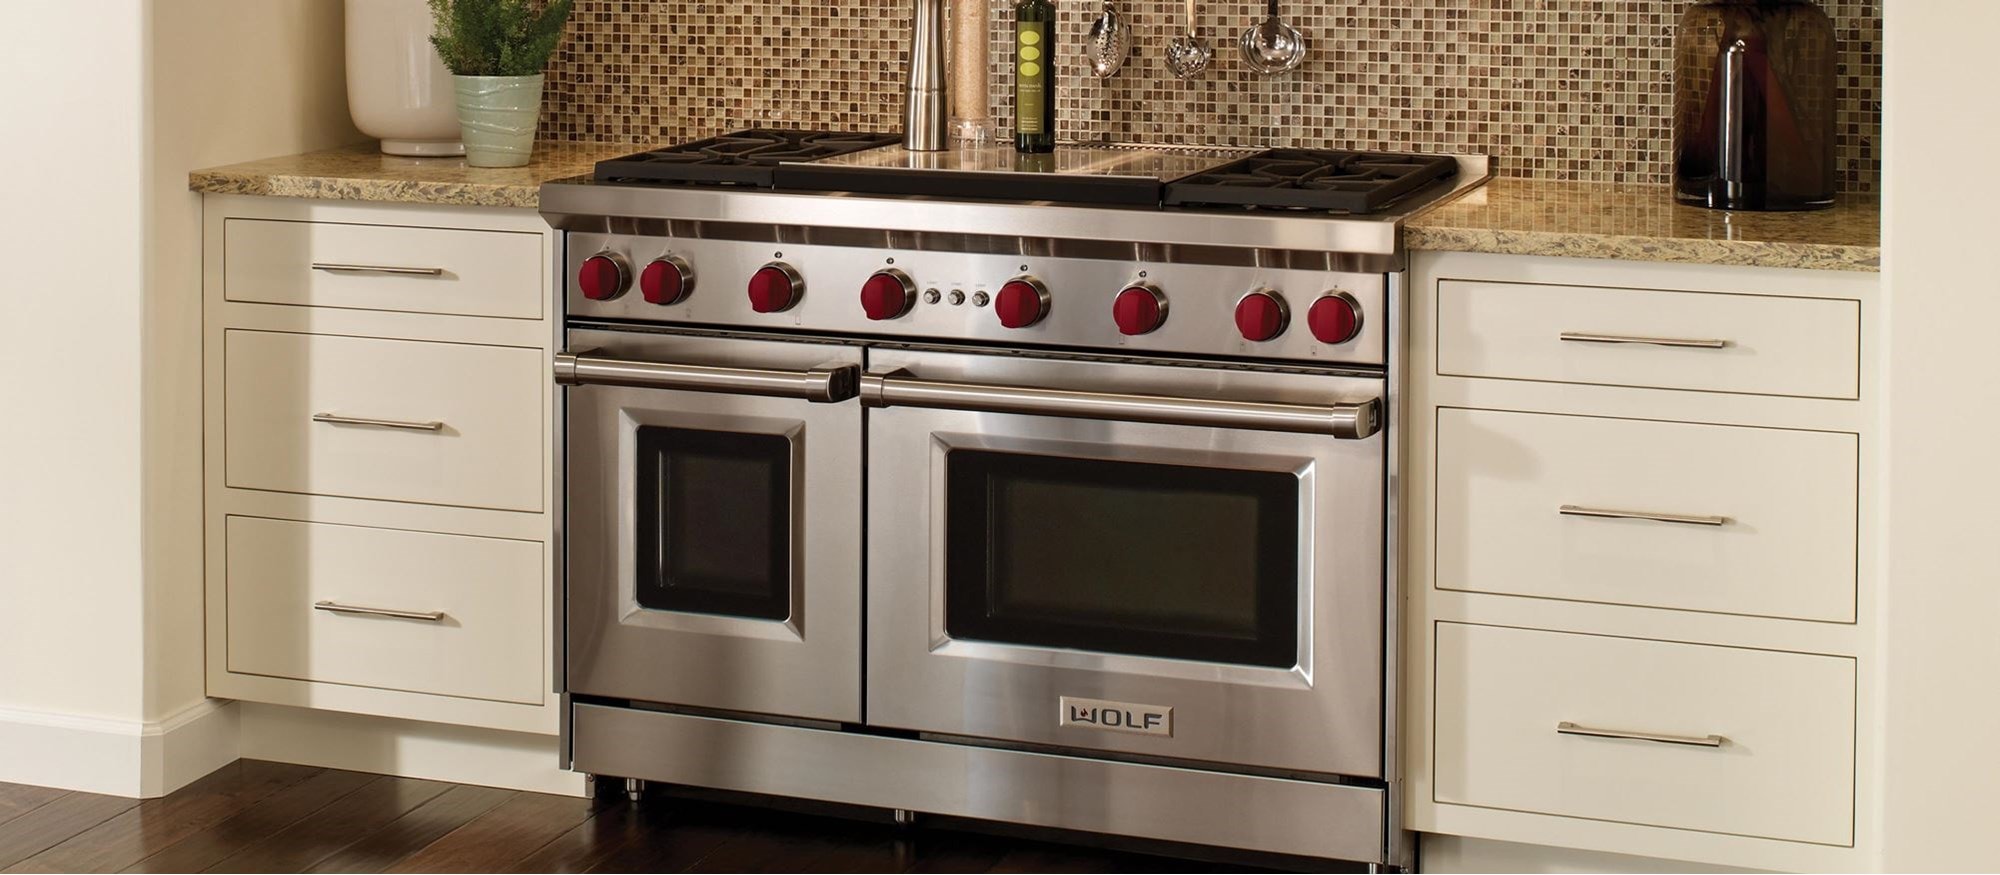 Dual Fuel Cooking in your Kitchen with a Wolf Range Cooker, Kitchen  Appliances Advice